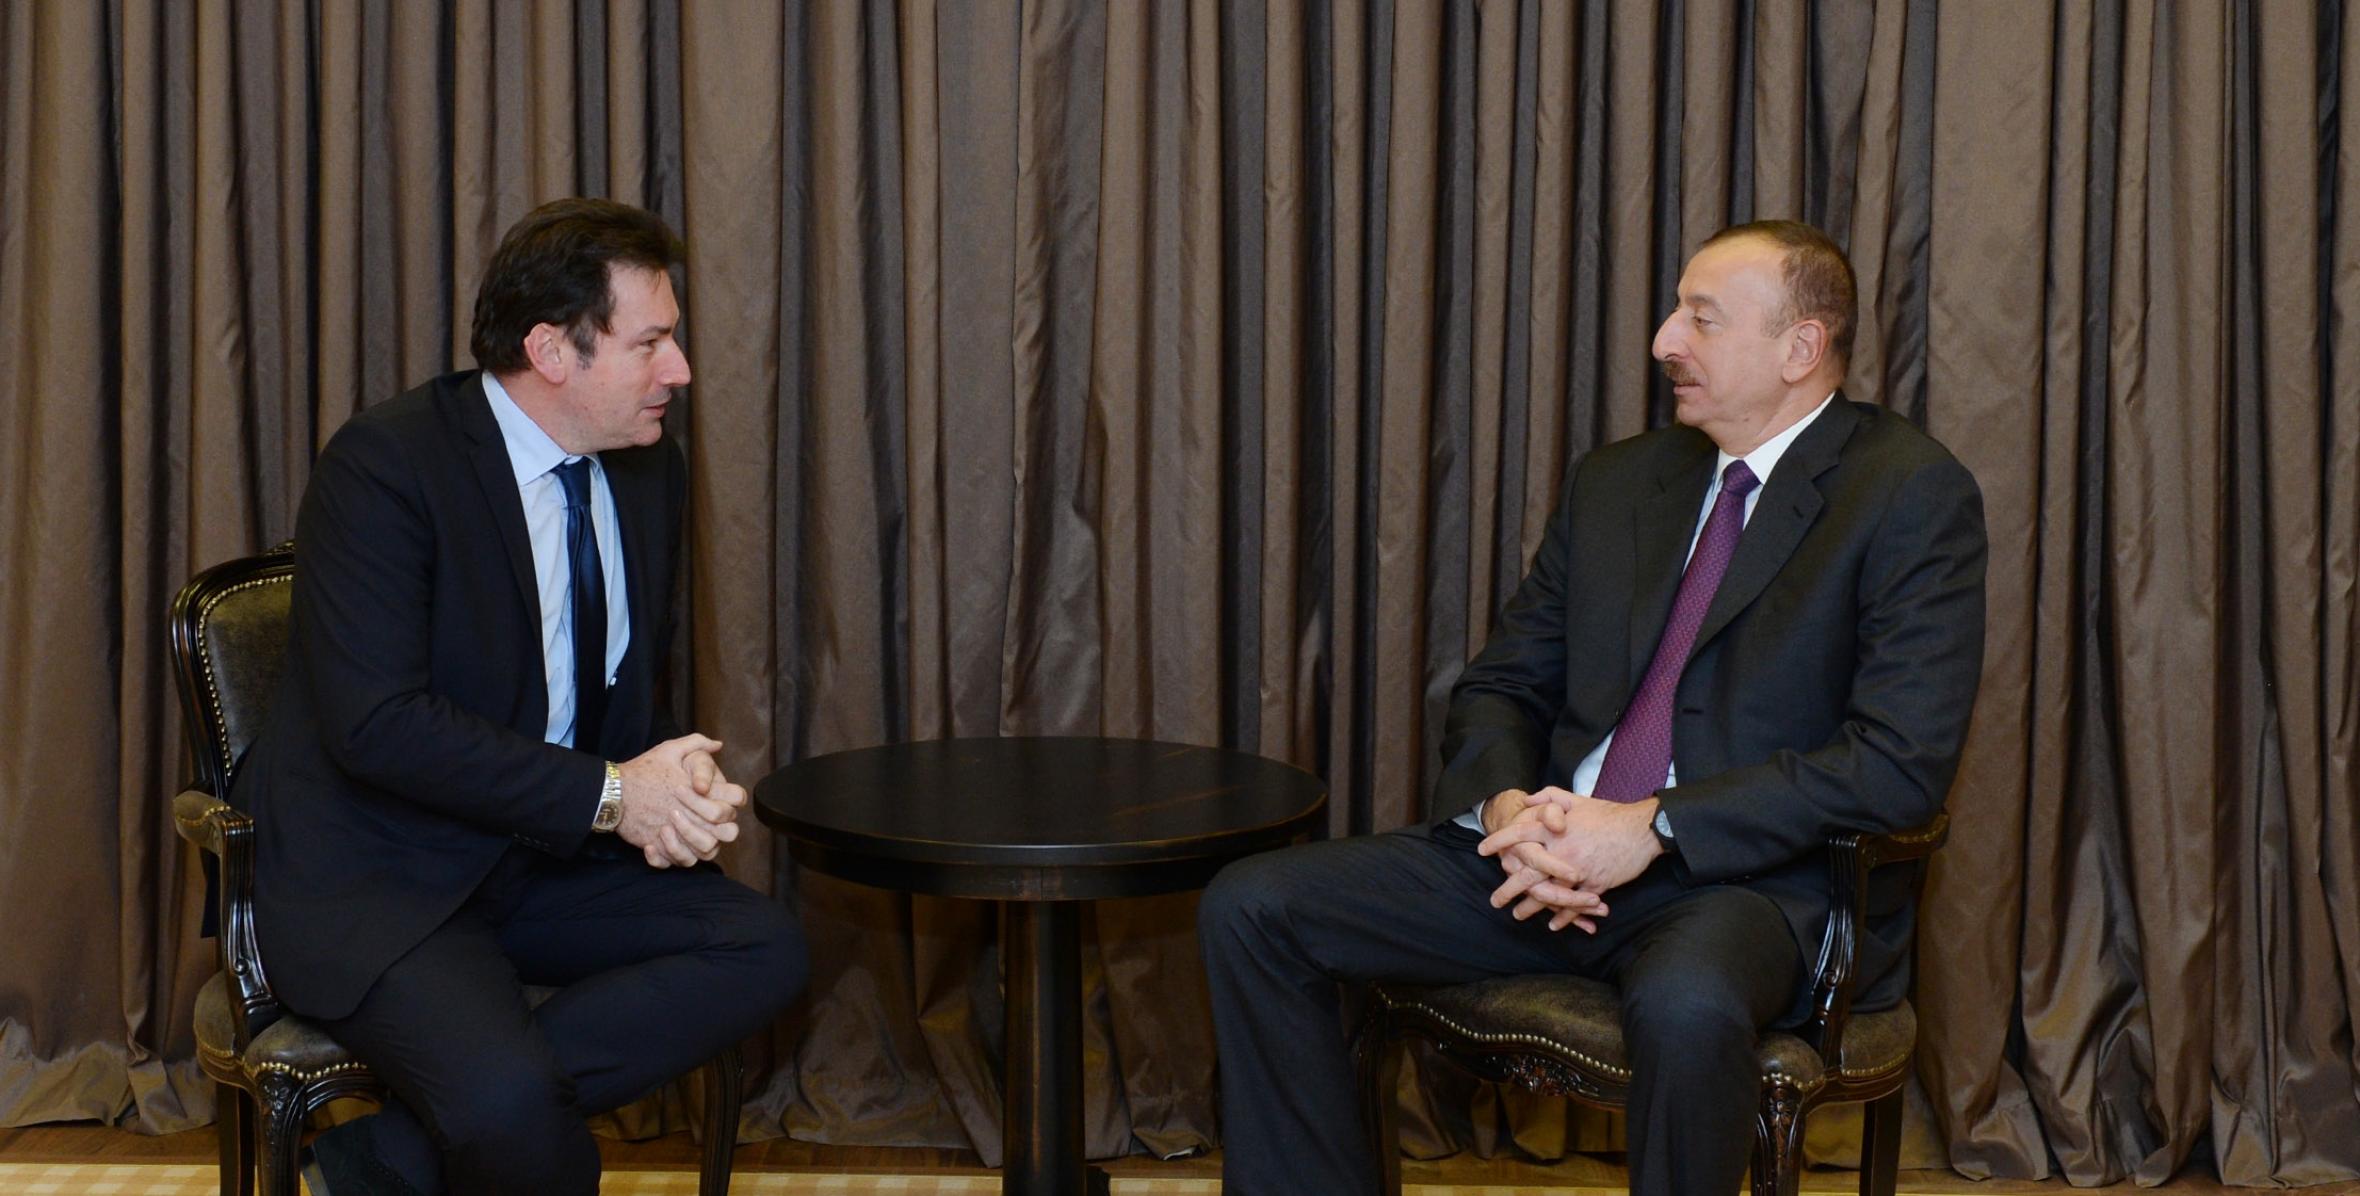 Ilham Aliyev met with Chief Executive Officer of Airbus Group International Jean-Pierre Talamoni in Davos